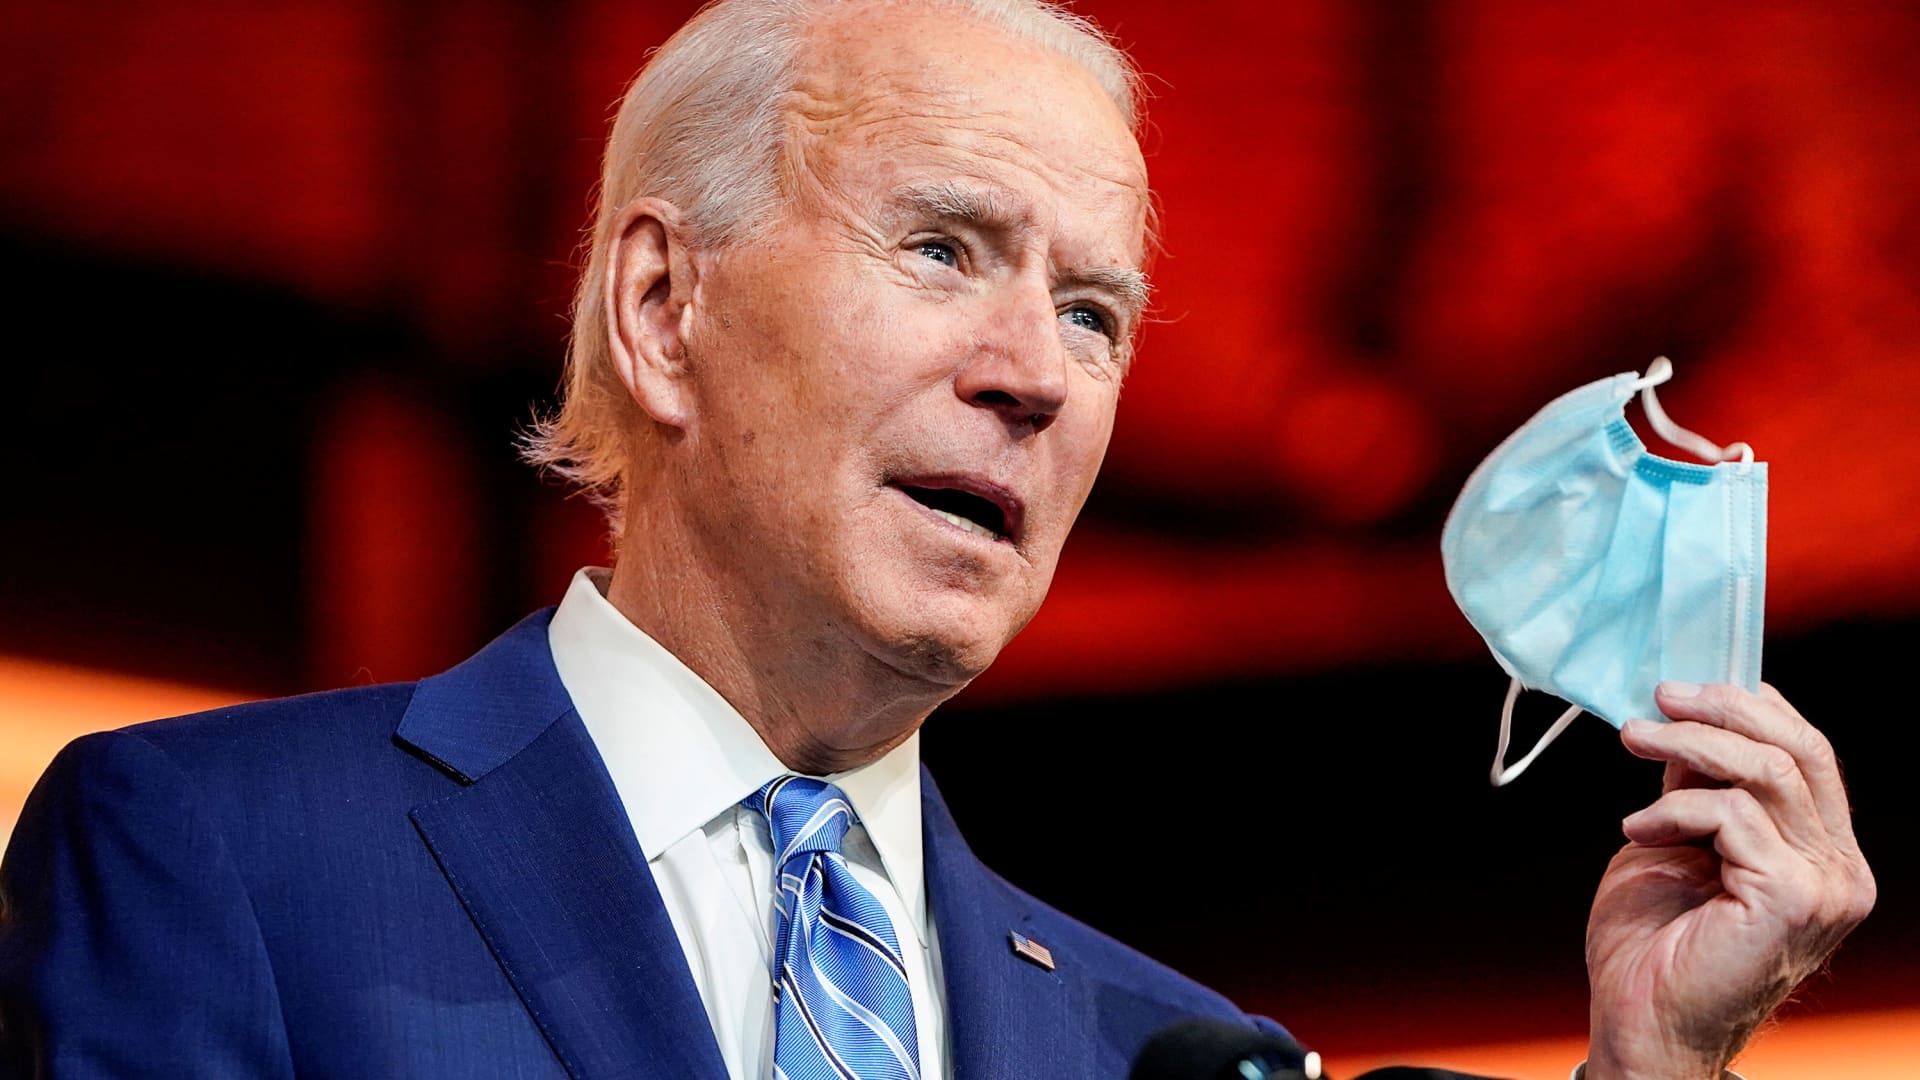 U.S. President-elect Joe Biden holds up a face mask while speaking about the coronavirus disease (COVID-19) as he delivers a pre-Thanksgiving address at his transition headquarters in Wilmington, Delaware, November 25, 2020.